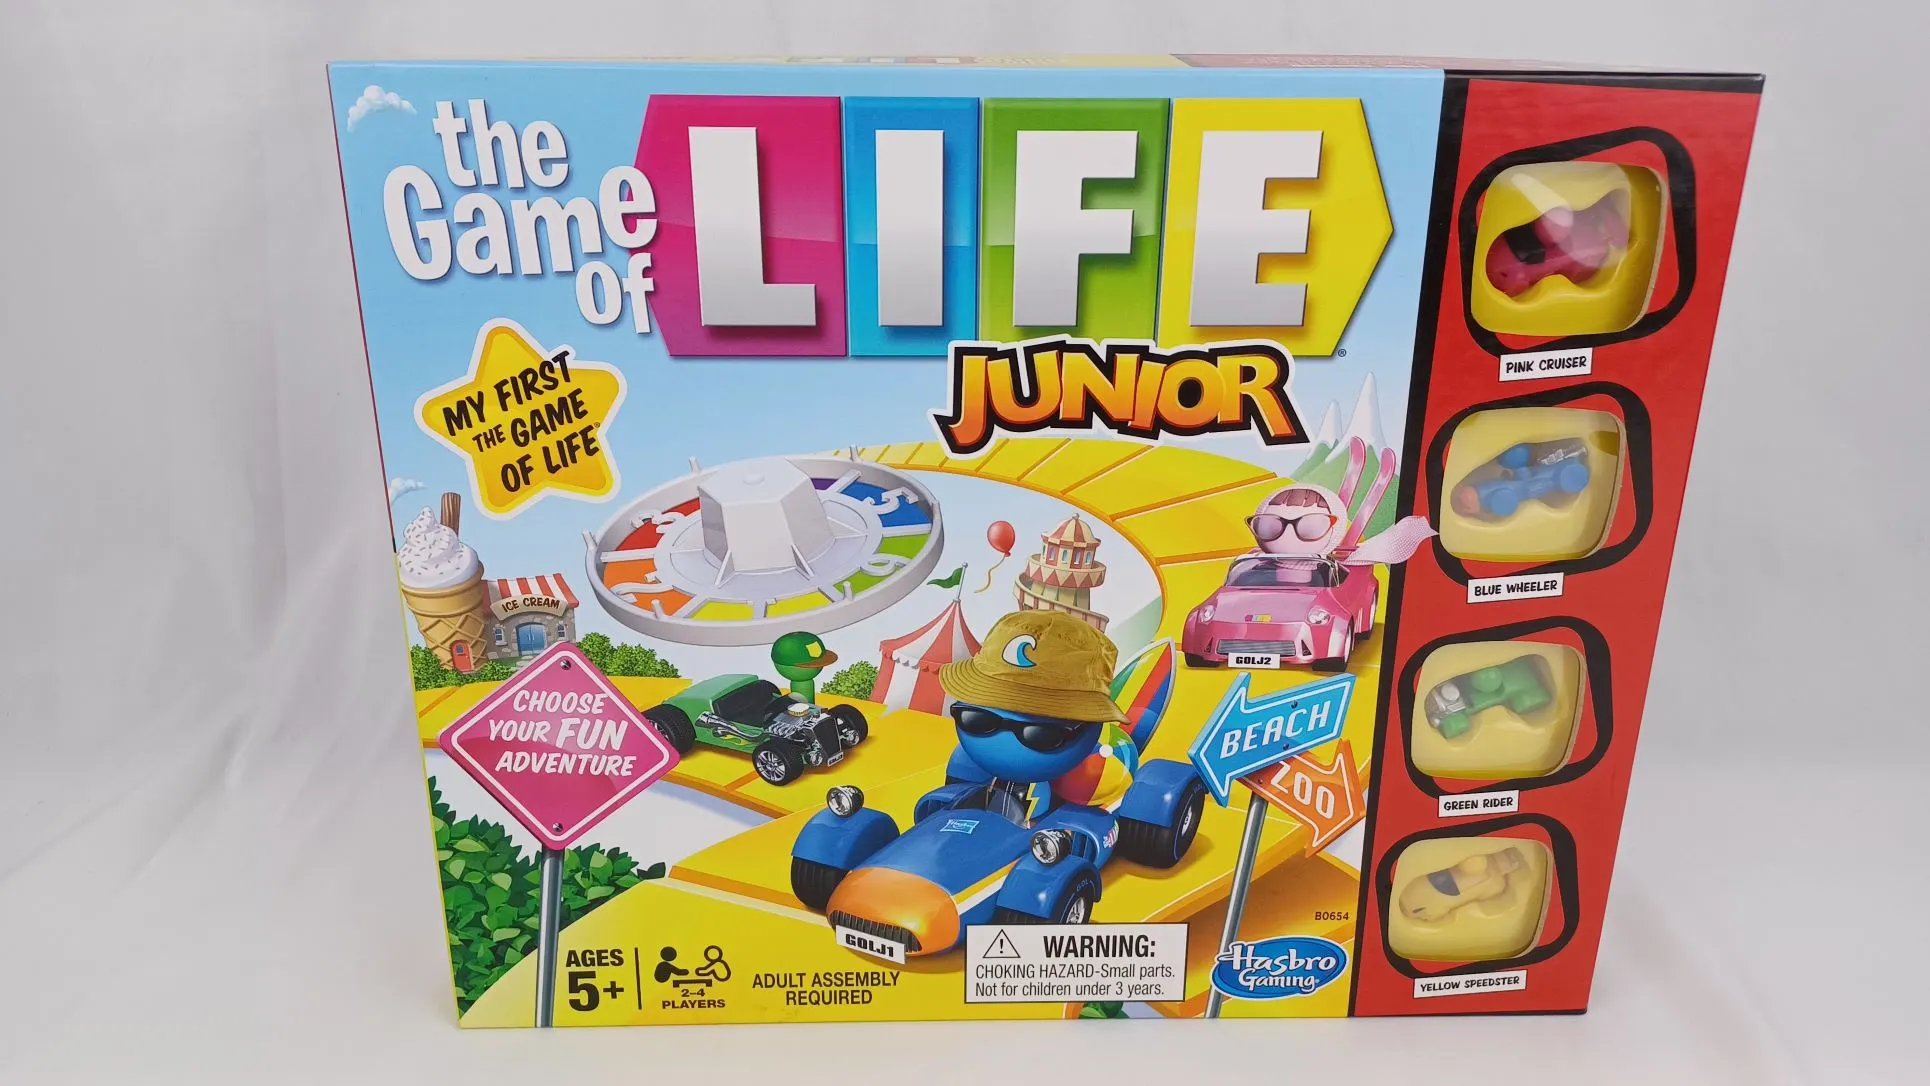 The Game of Life: Rules and How to Play